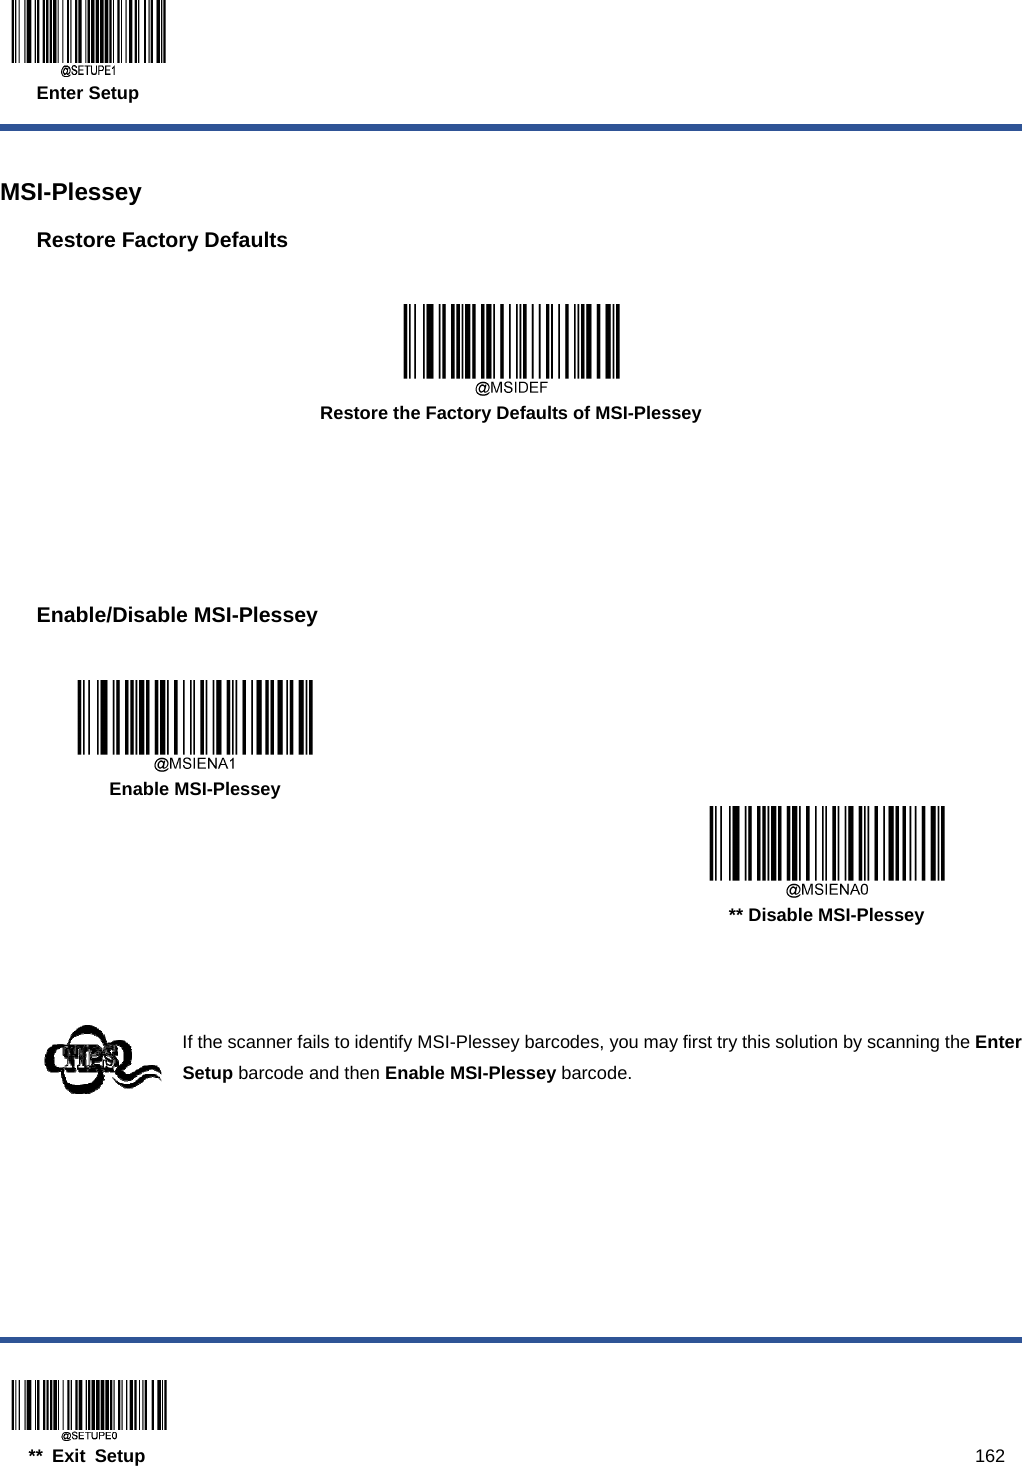  Enter Setup  ** Exit Setup                                                                                           162  MSI-Plessey Restore Factory Defaults   Restore the Factory Defaults of MSI-Plessey      Enable/Disable MSI-Plessey     Enable MSI-Plessey      ** Disable MSI-Plessey    If the scanner fails to identify MSI-Plessey barcodes, you may first try this solution by scanning the Enter Setup barcode and then Enable MSI-Plessey barcode.  